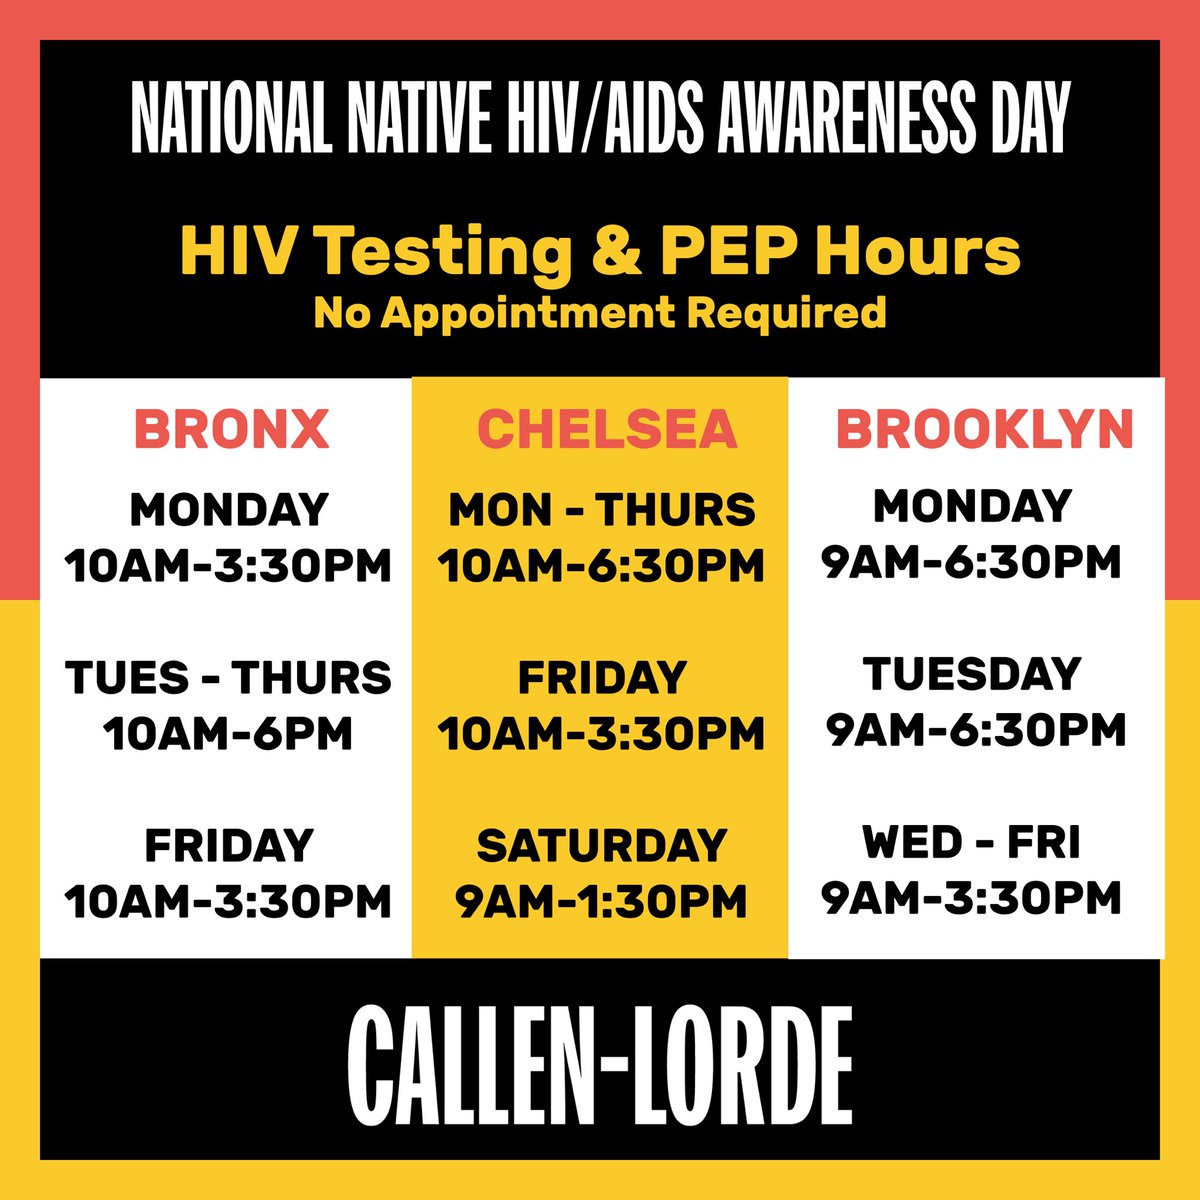 Today is National Native HIV/AIDS Awareness Day. Indigenous communities are disparately impacted by HIV/AIDS, STIs, and viral hepatitis due to systemic health inequities. 

Reminder: Callen-Lorde offers free HIV testing & PEP services  - no appointment required! 

#NNHAAD